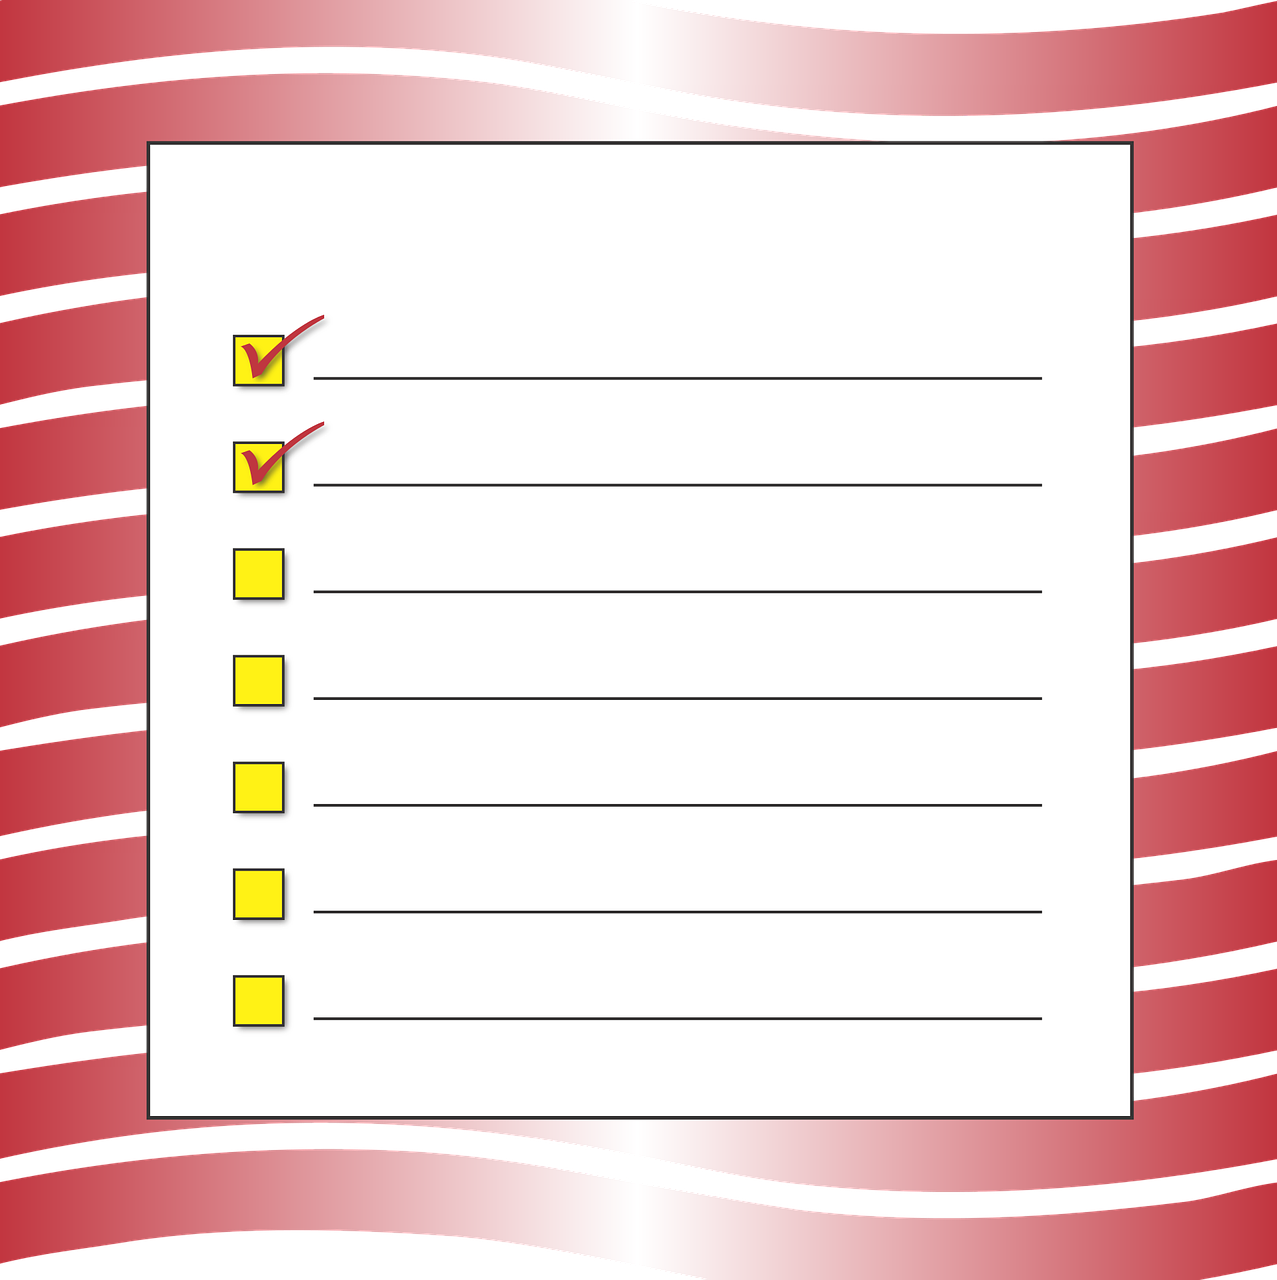 checklist to do activities free photo